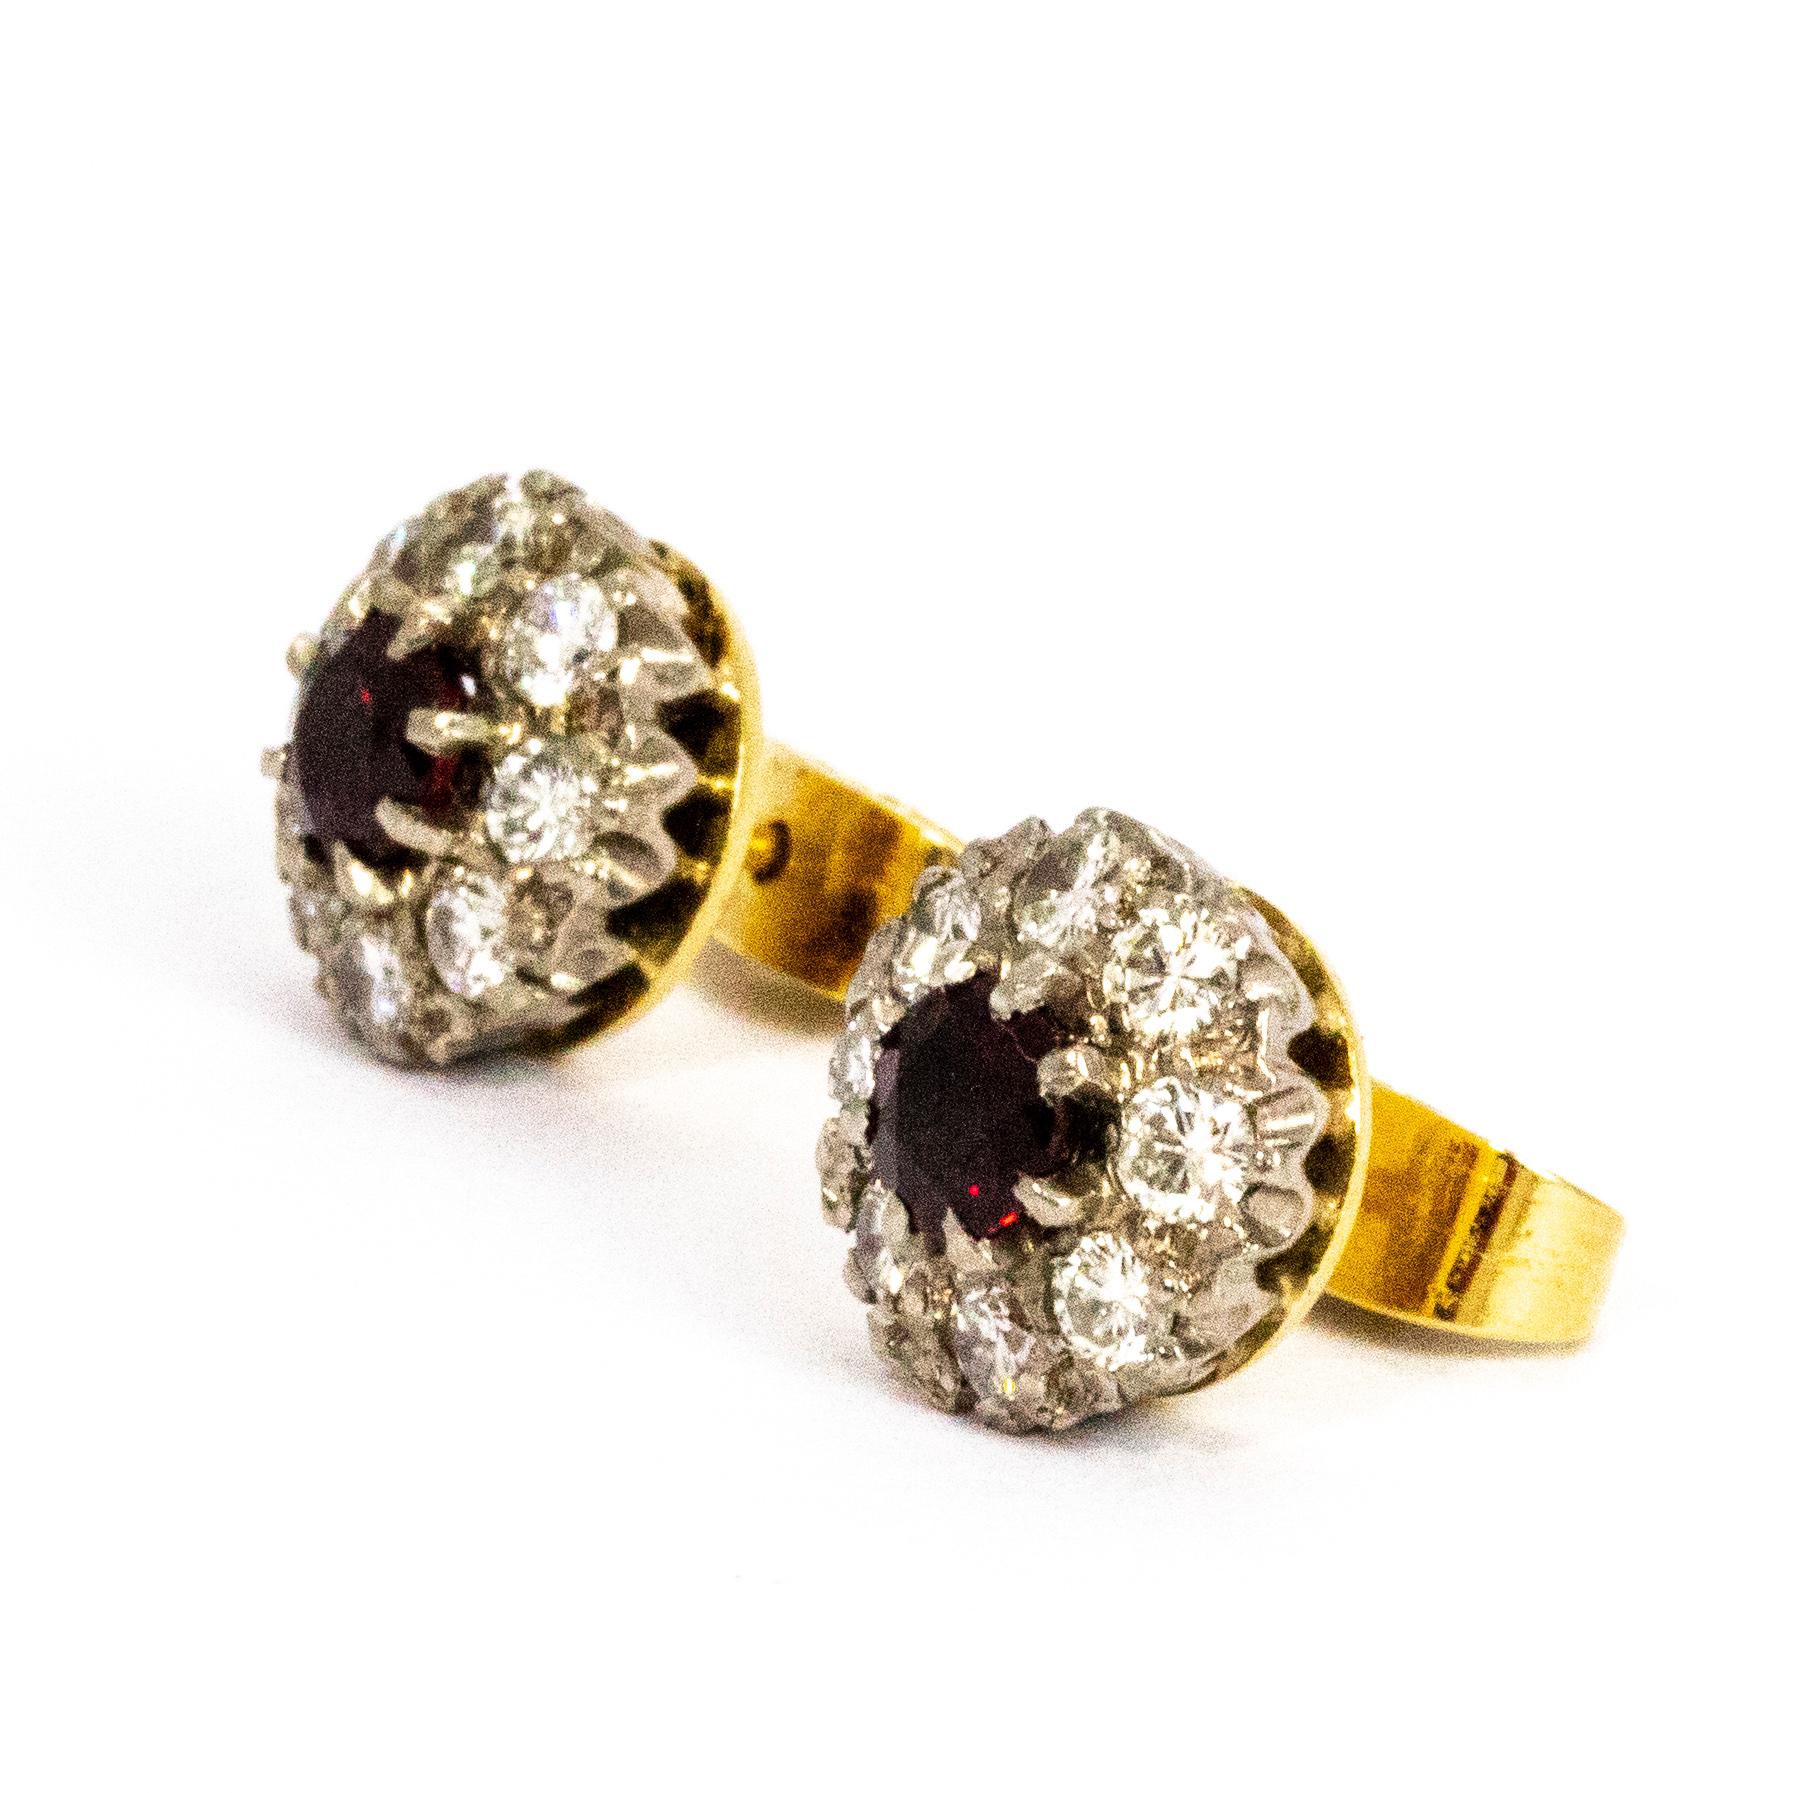 A wonderful pair of vintage earrings set with exquisite ruby and diamond clusters. The central rubies each measure approximately 30 points each and have stunning deep red colouring, they are surrounded by beautiful halos of white diamonds. The total